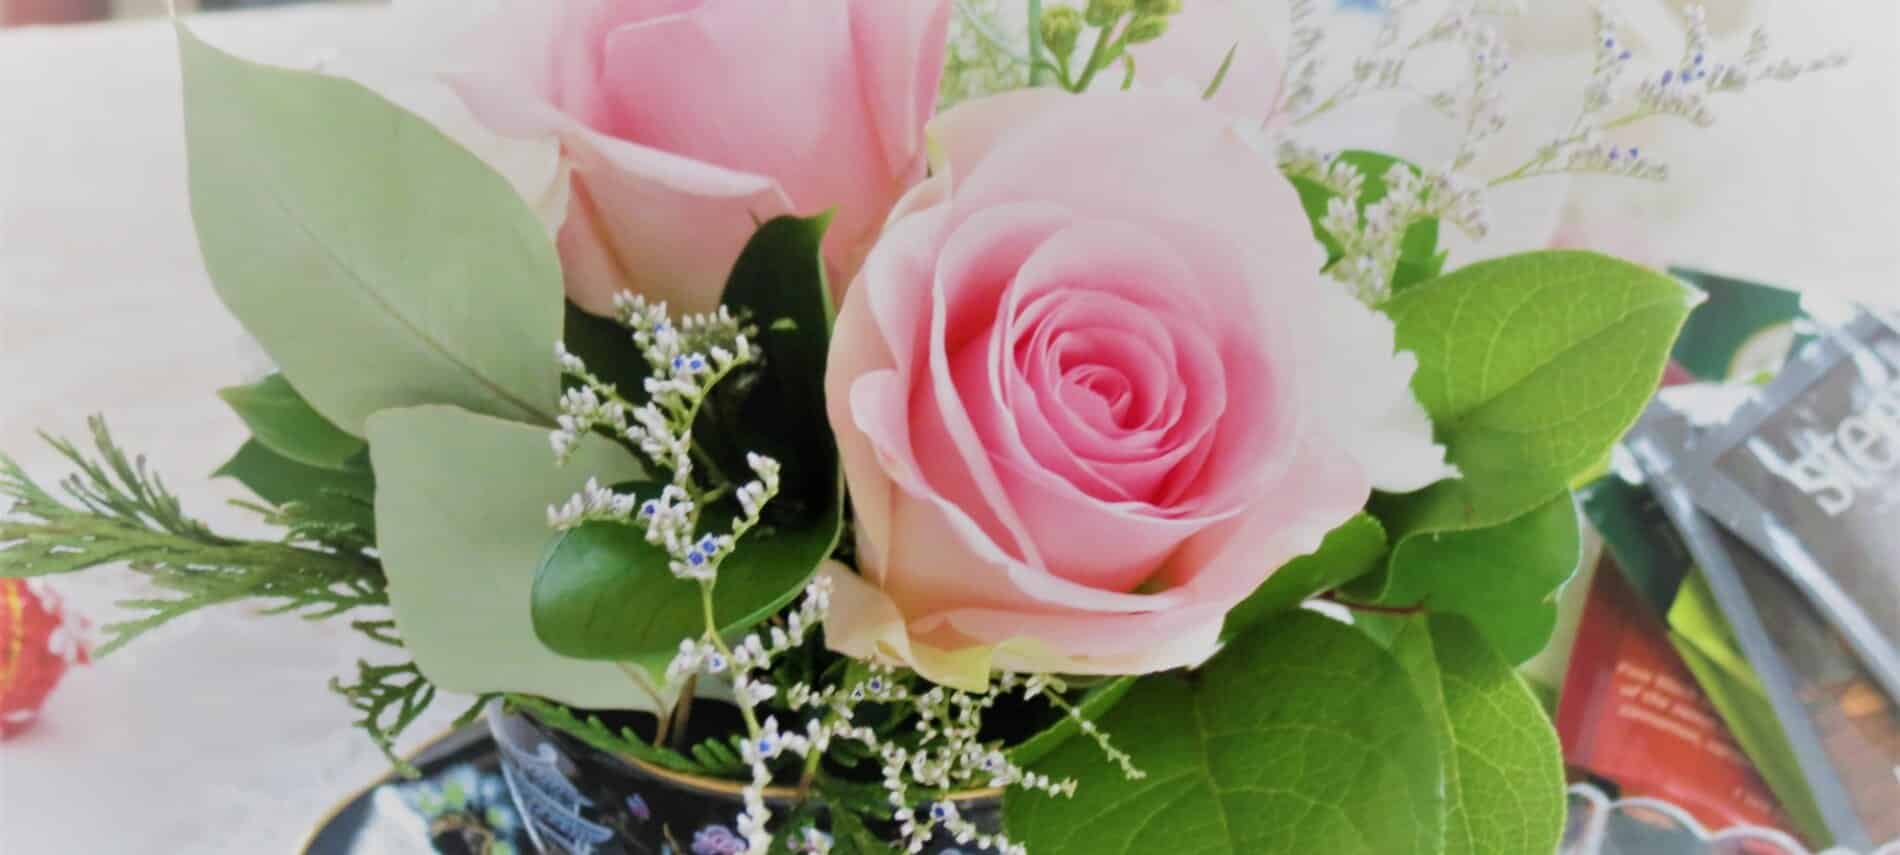 Pink roses with green leaves in a bouquet with baby's breath.